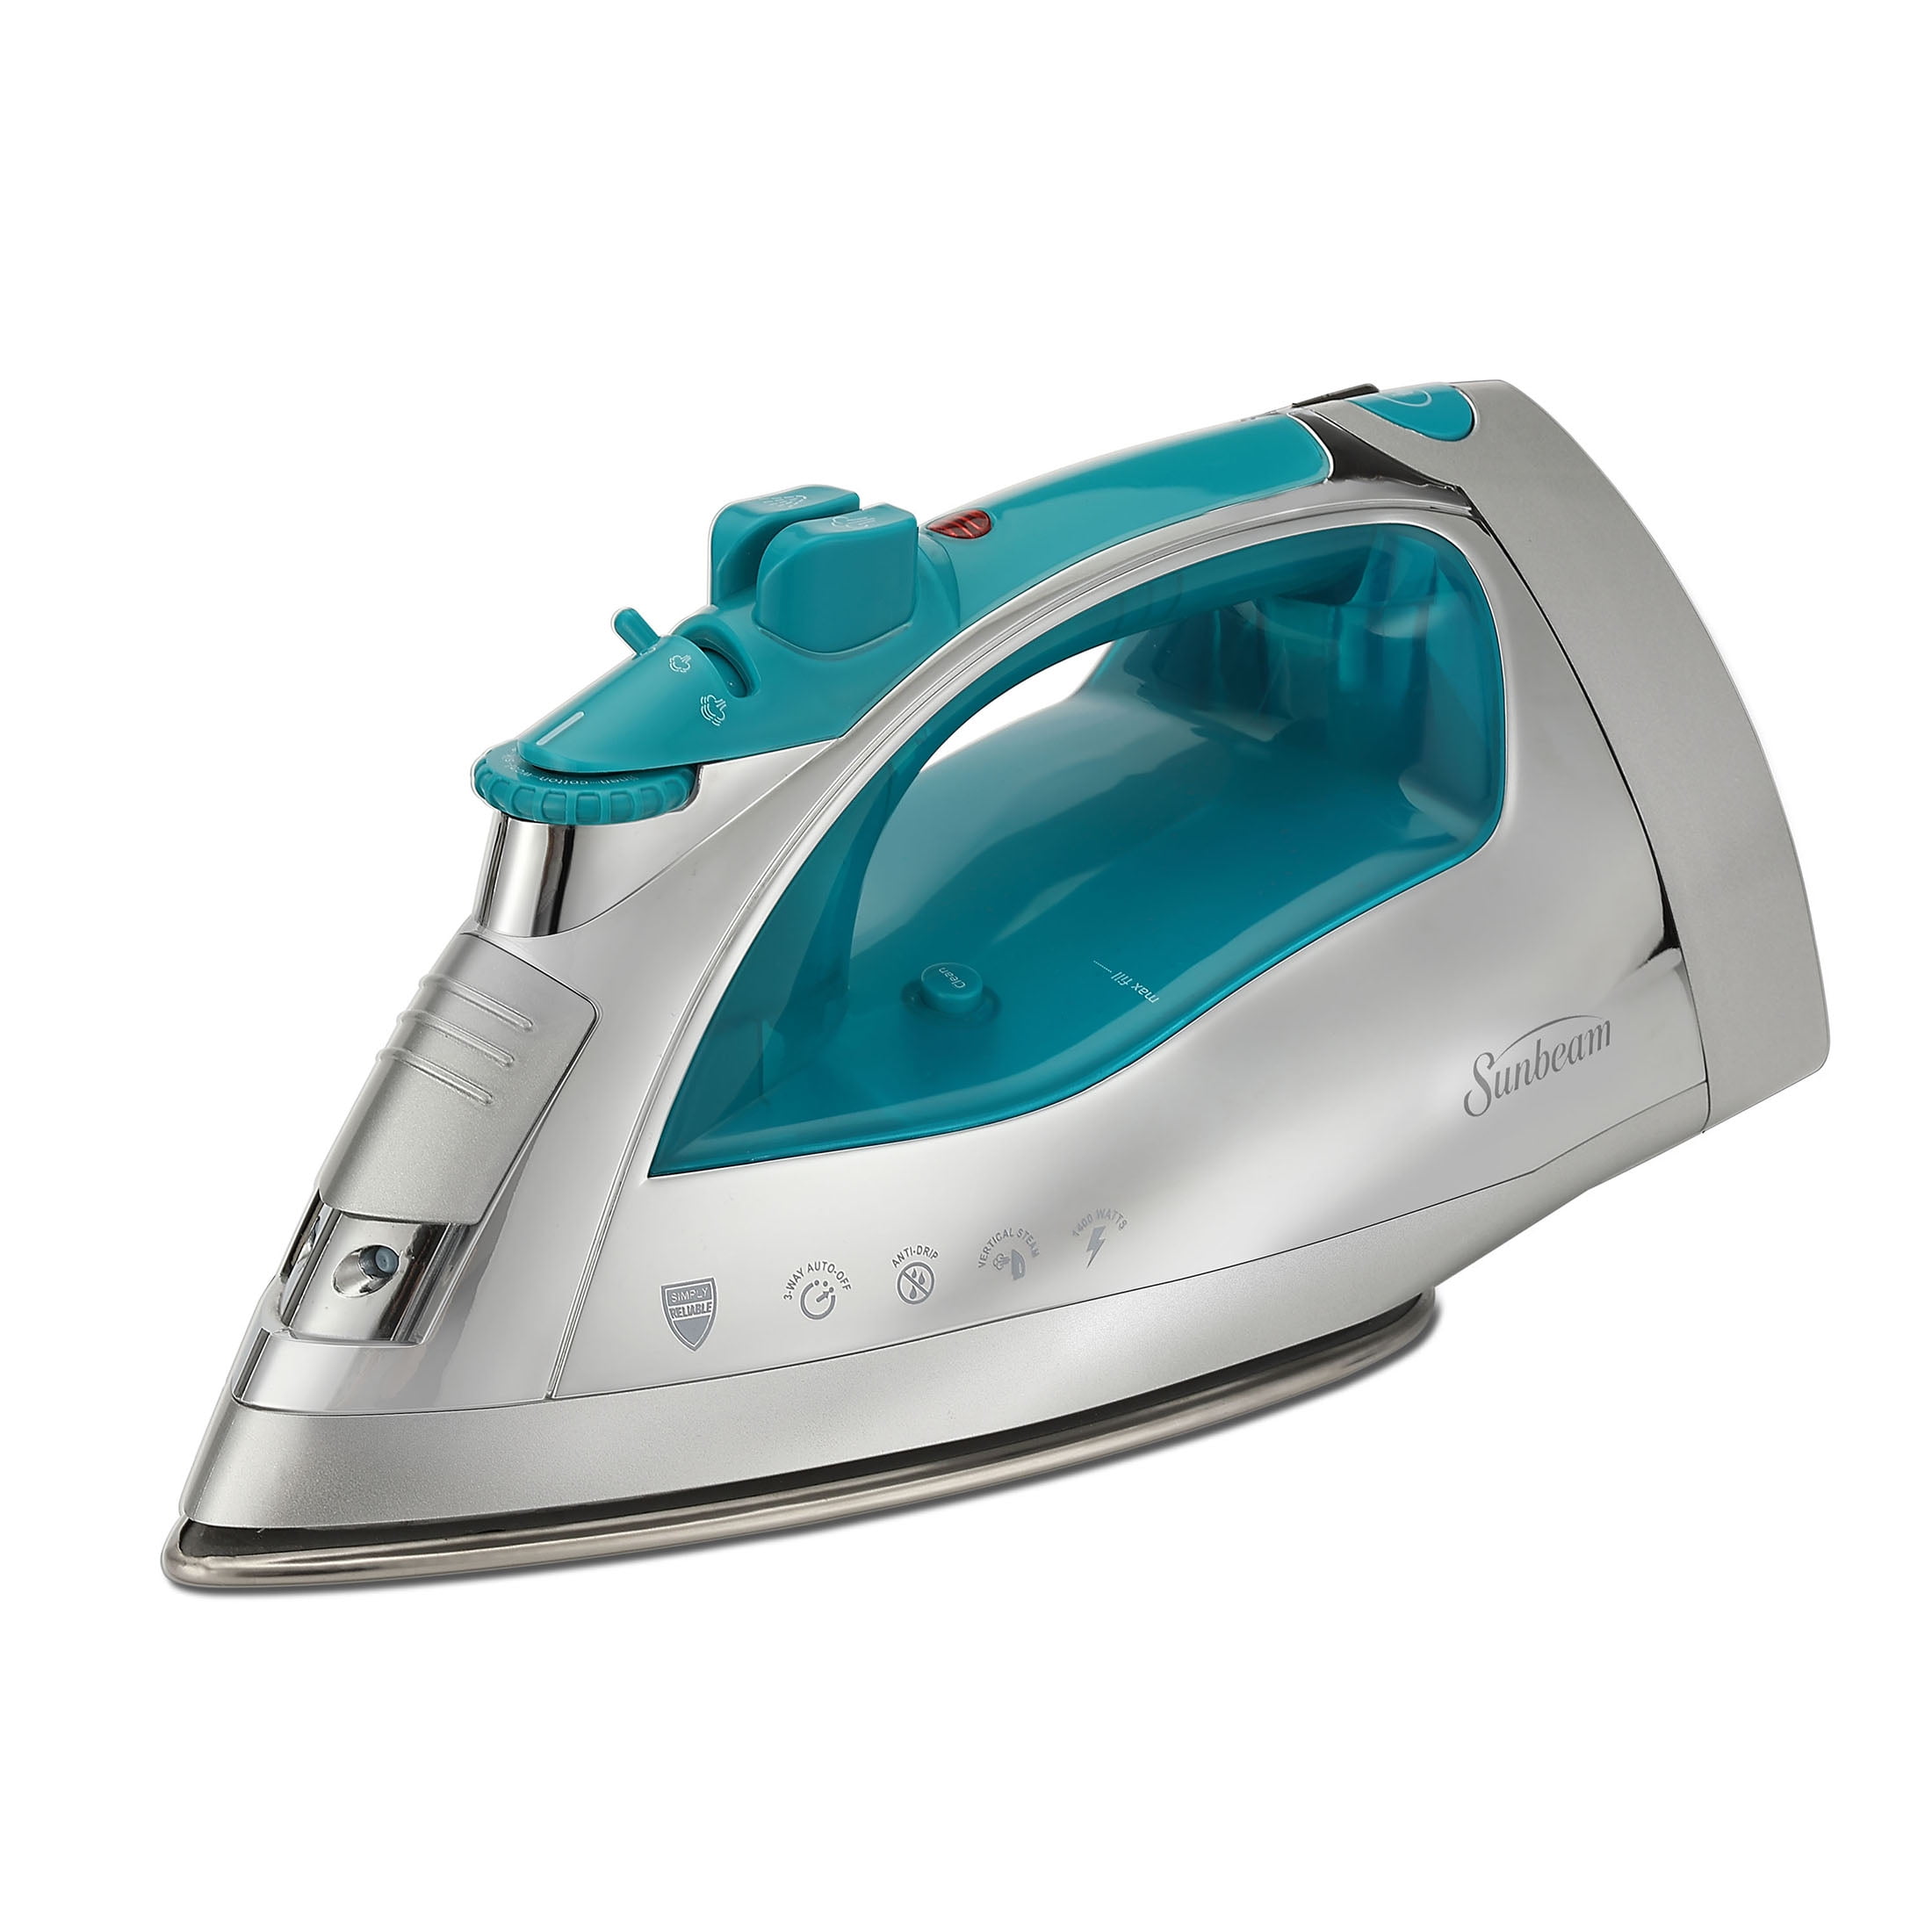 Reliable Red Auto-steam Iron Automatic Shut-off (1800-Watt) in the